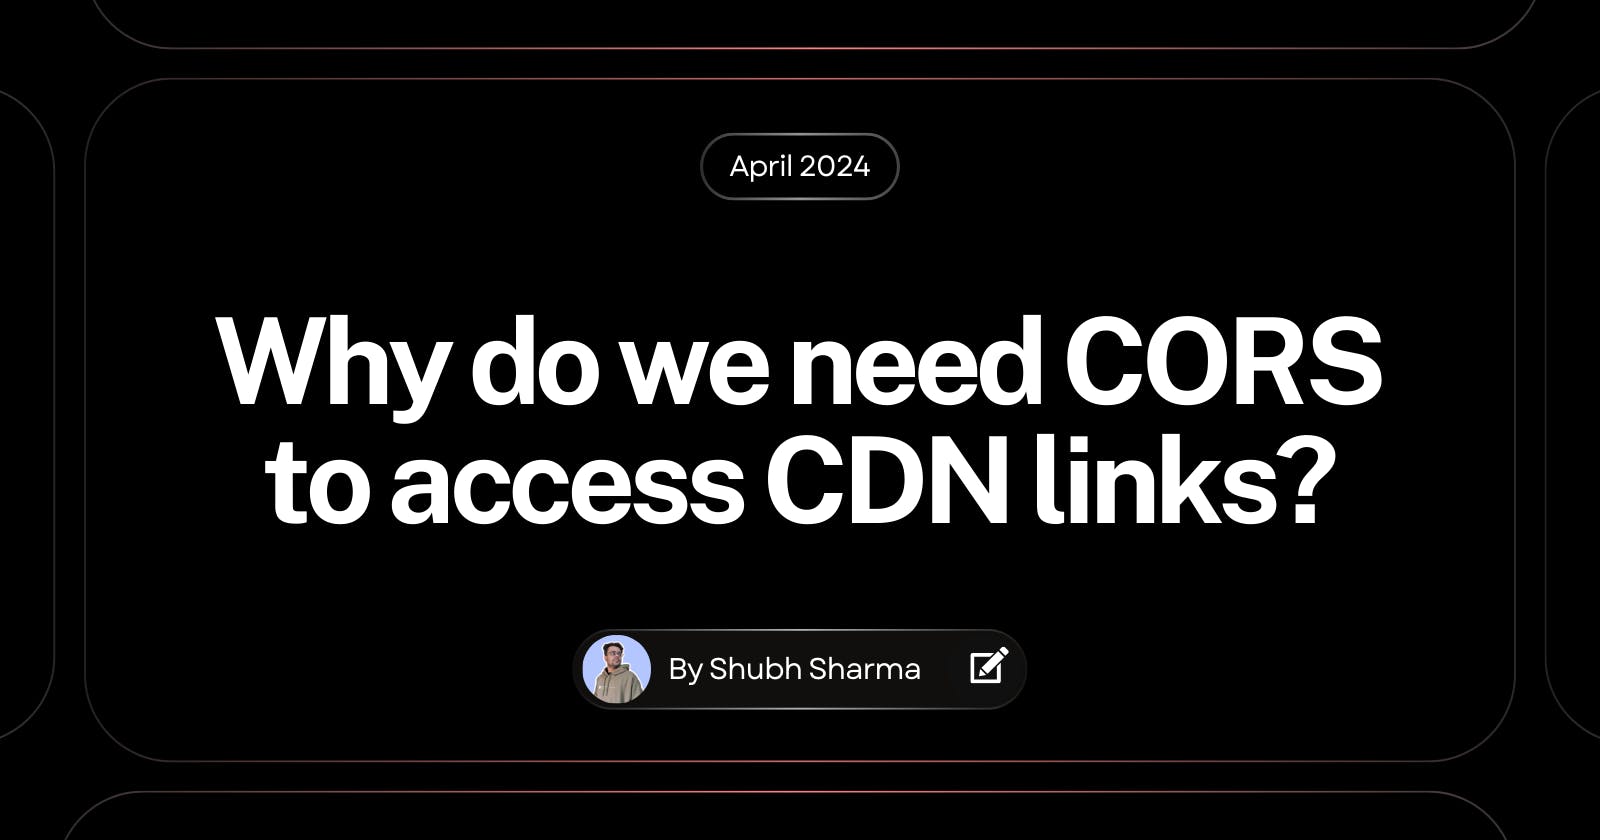 Why do we need CORS to access CDN links?